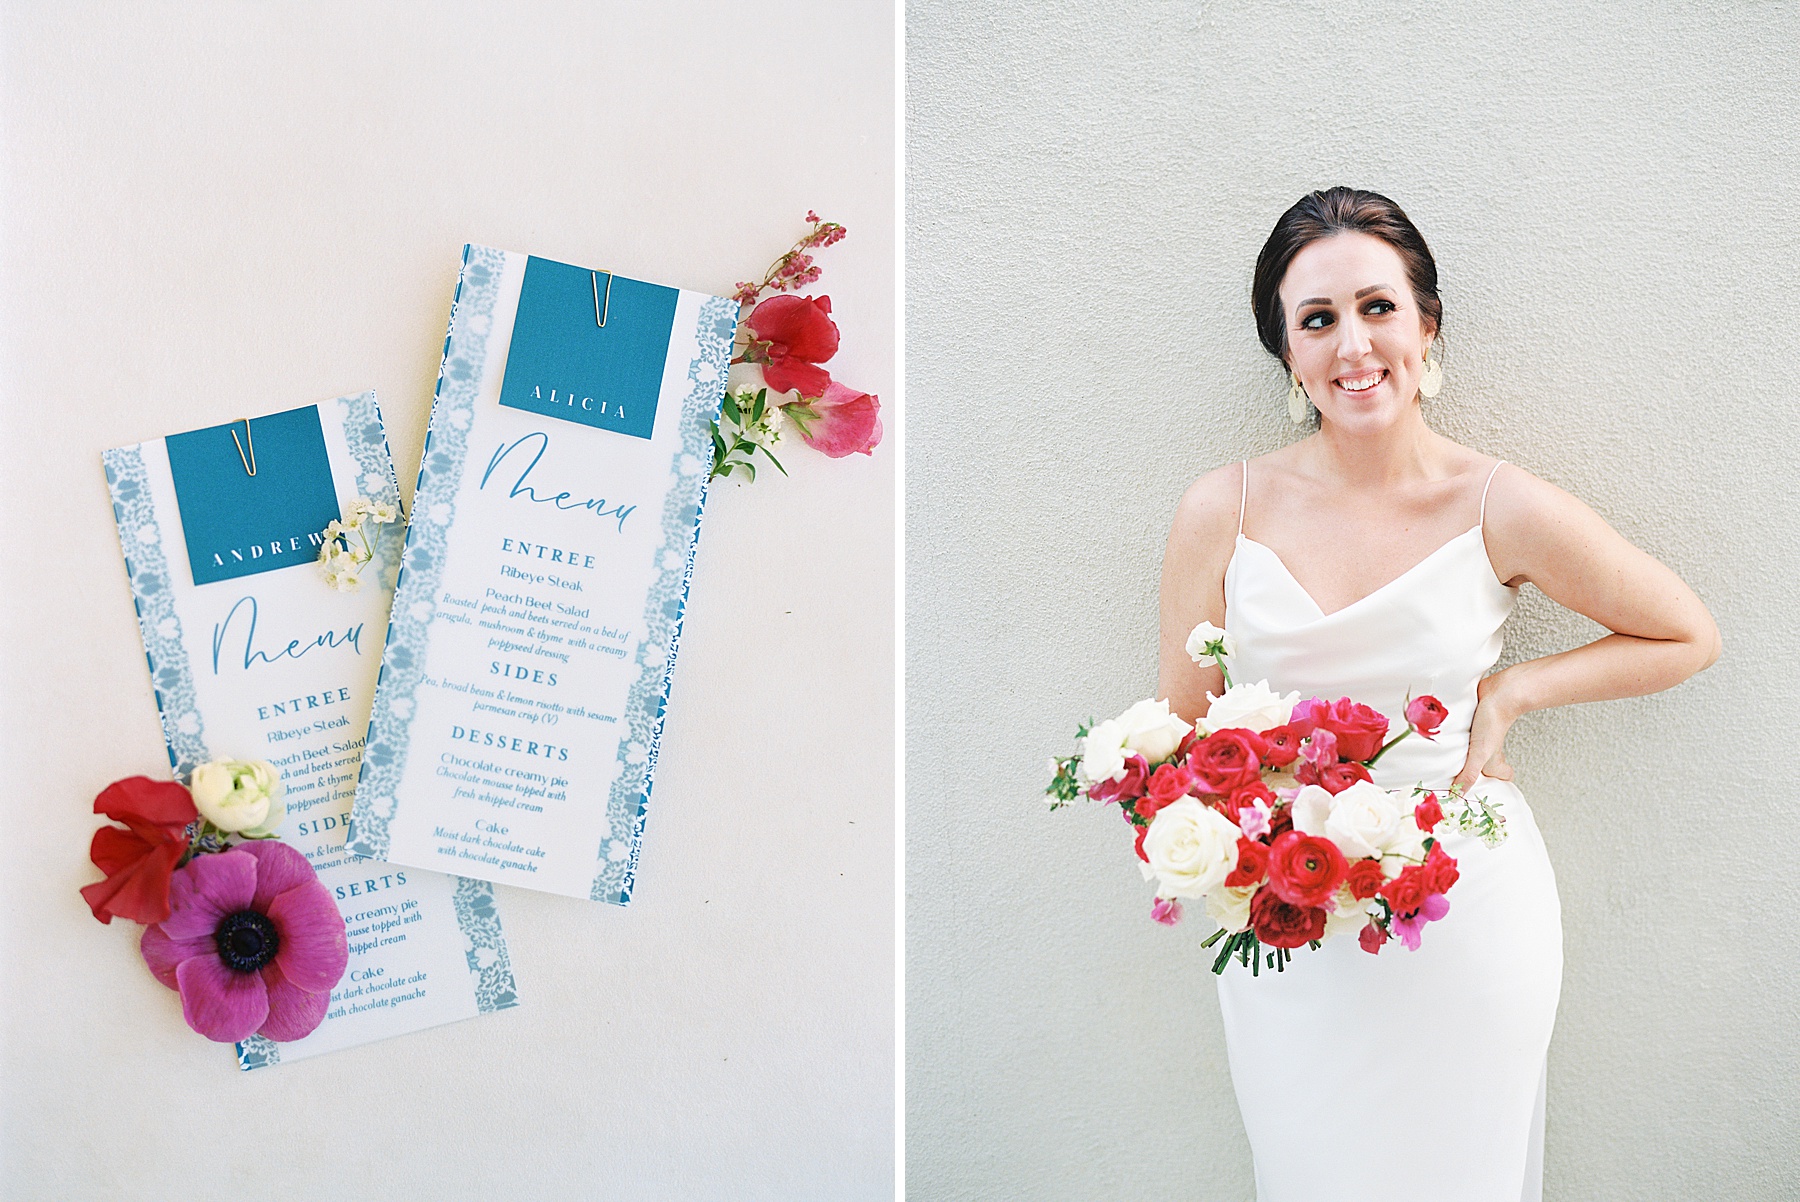 Grecian Inspired Micro-Wedding with Events by Kristina Elyse - Ash Baumgartner - Inspired by This - Sonoma Wedding Photographer_0041.jpg